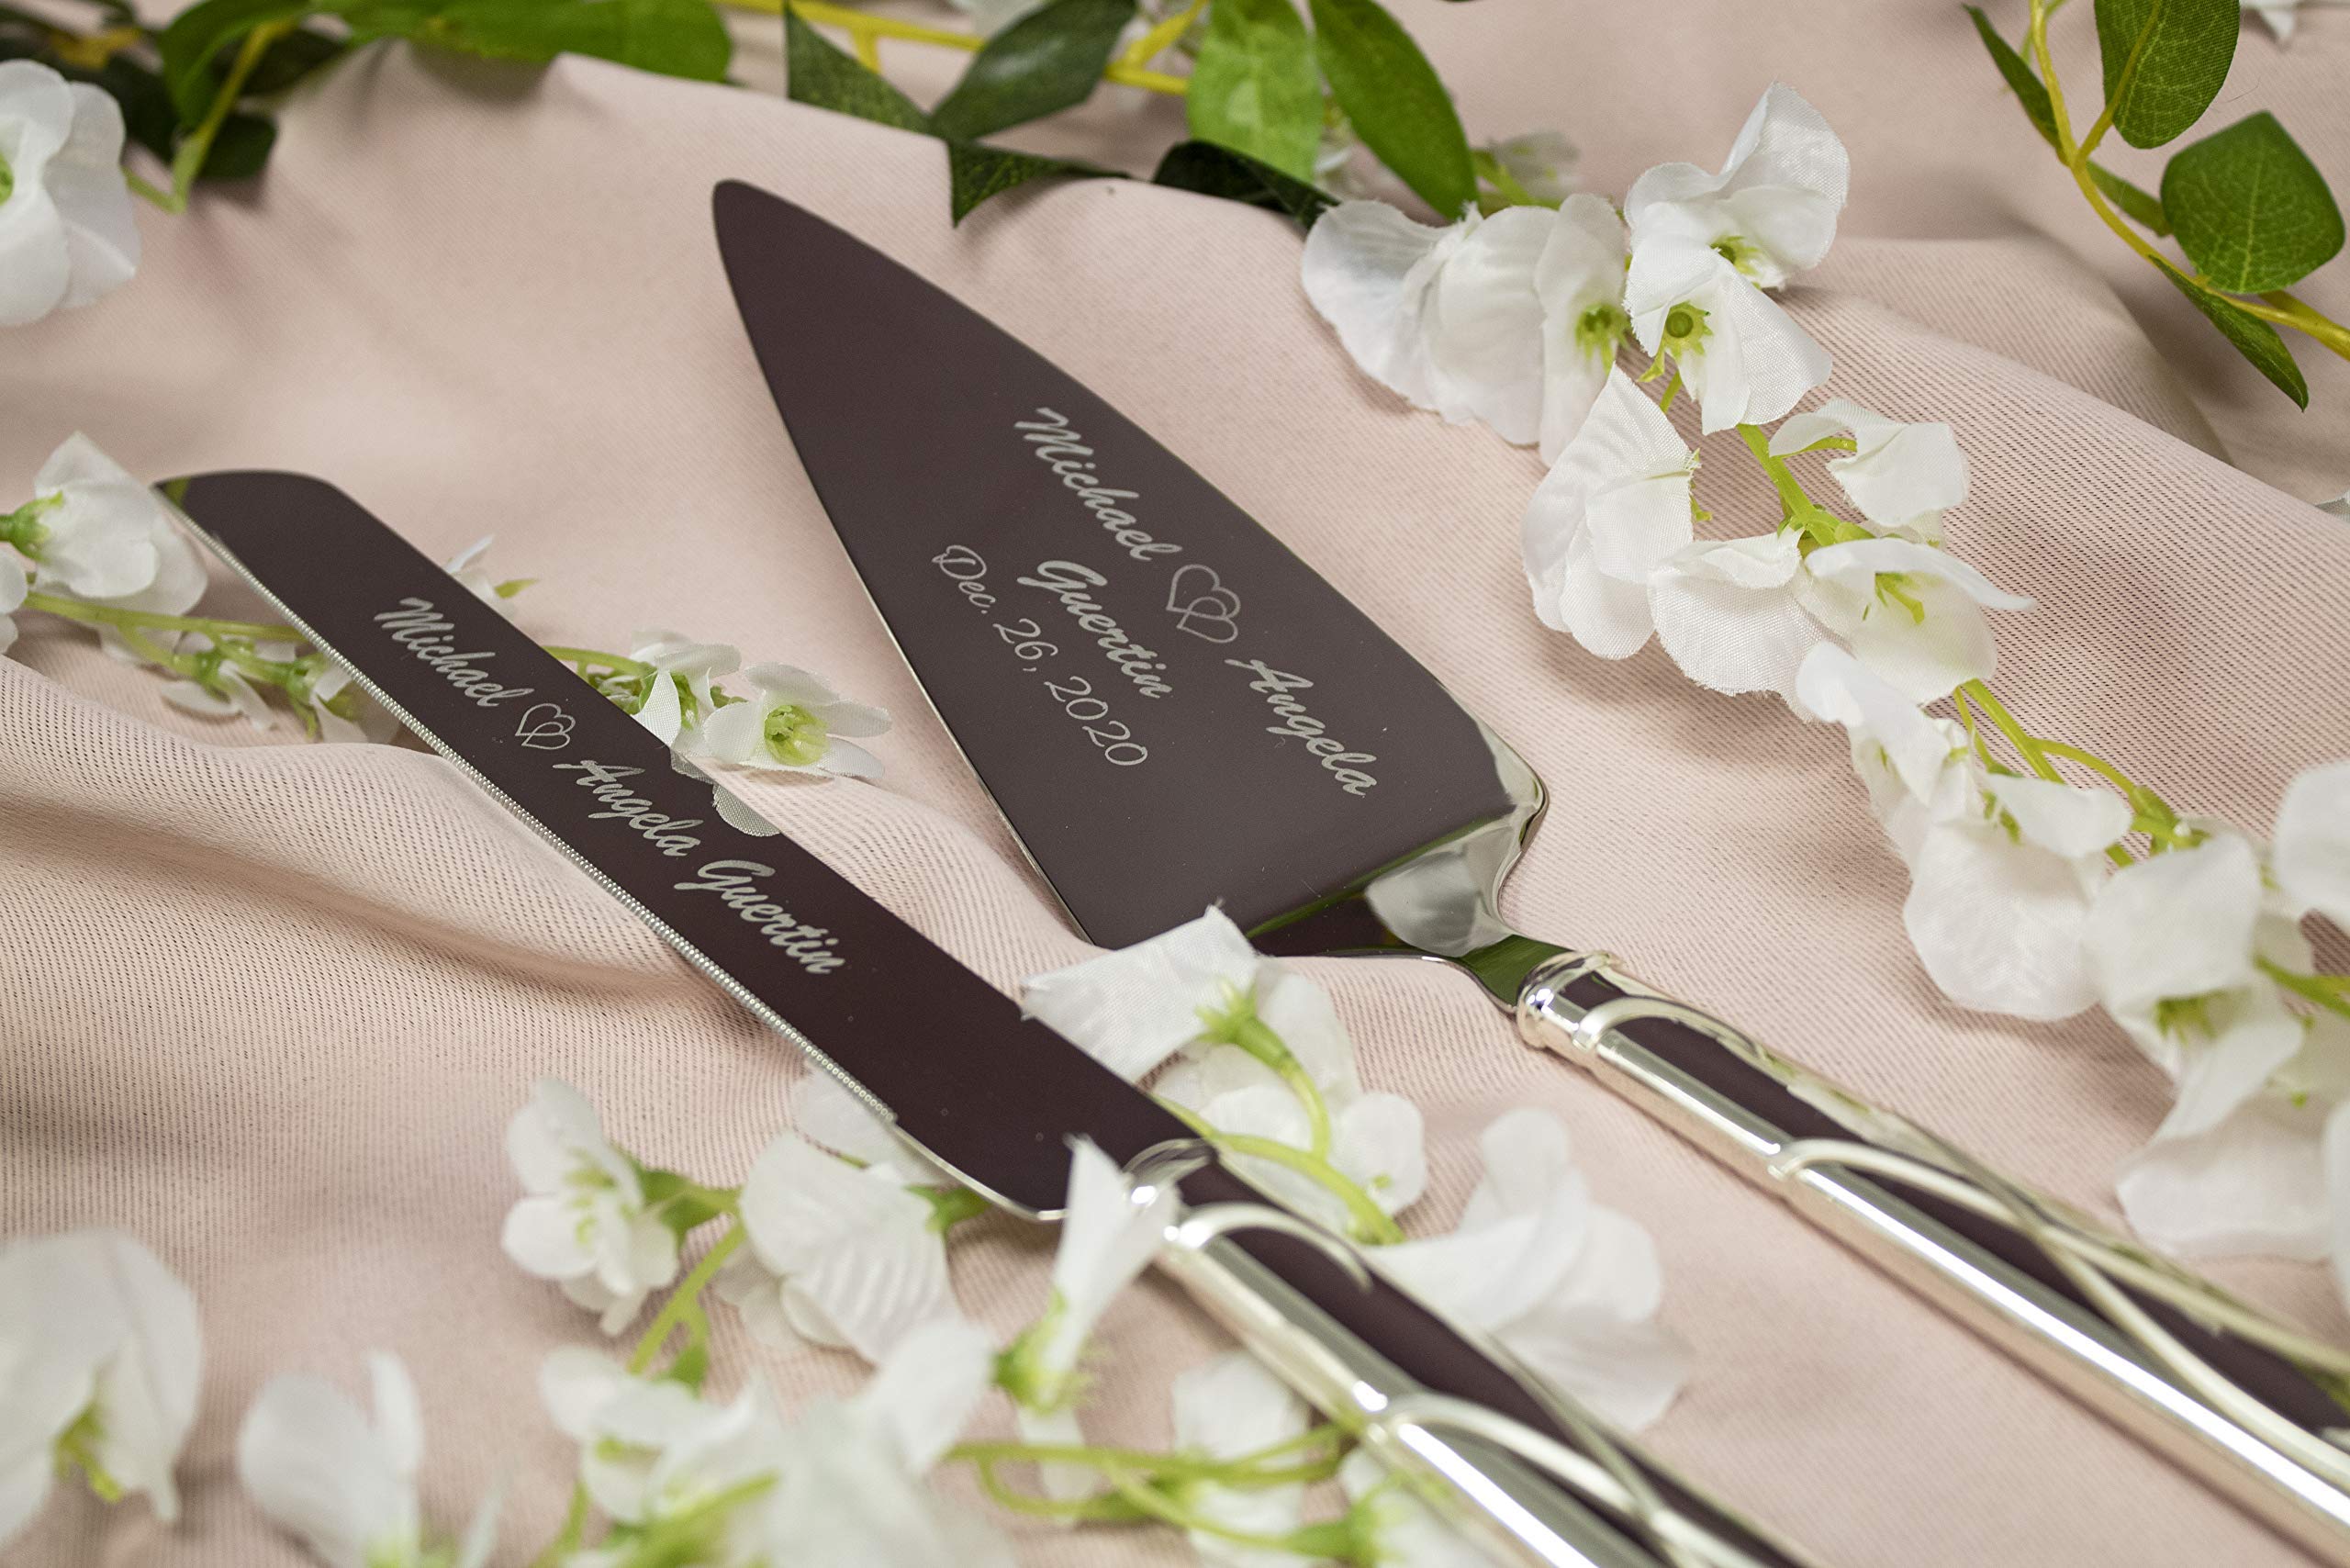 Lenox Bridal Adorn Silver Personalized Wedding Cake Knife and Server Set, Custom Engraved Wedding Cake Cutting Set, Accessories and Gifts for Bride and Groom